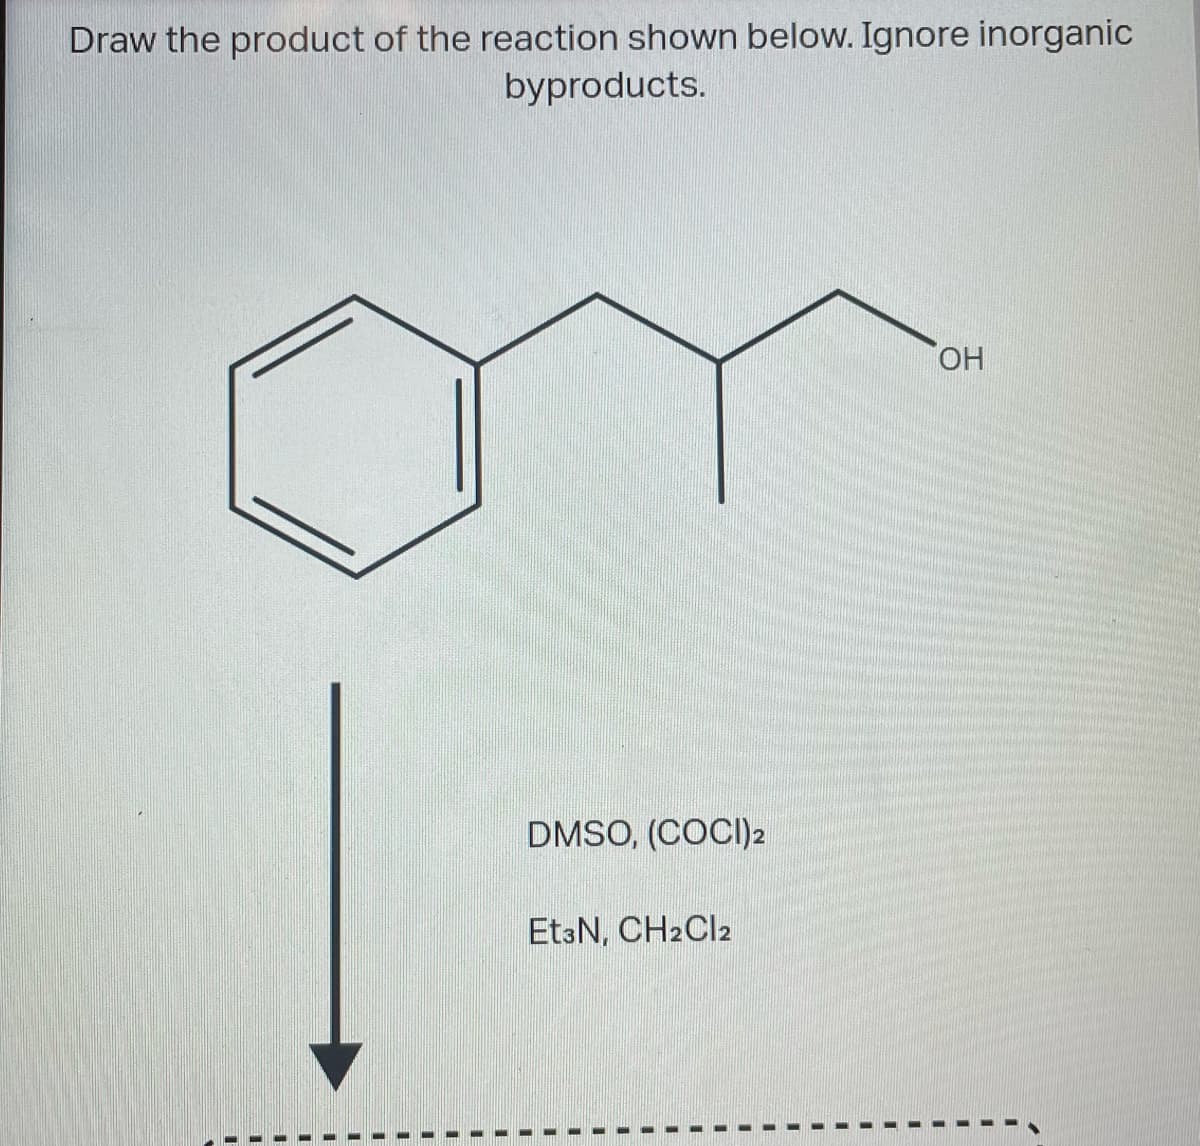 Draw the product of the reaction shown below. Ignore inorganic
byproducts.
OH
DMSO, (COCI) 2
Et3N, CH2Cl2